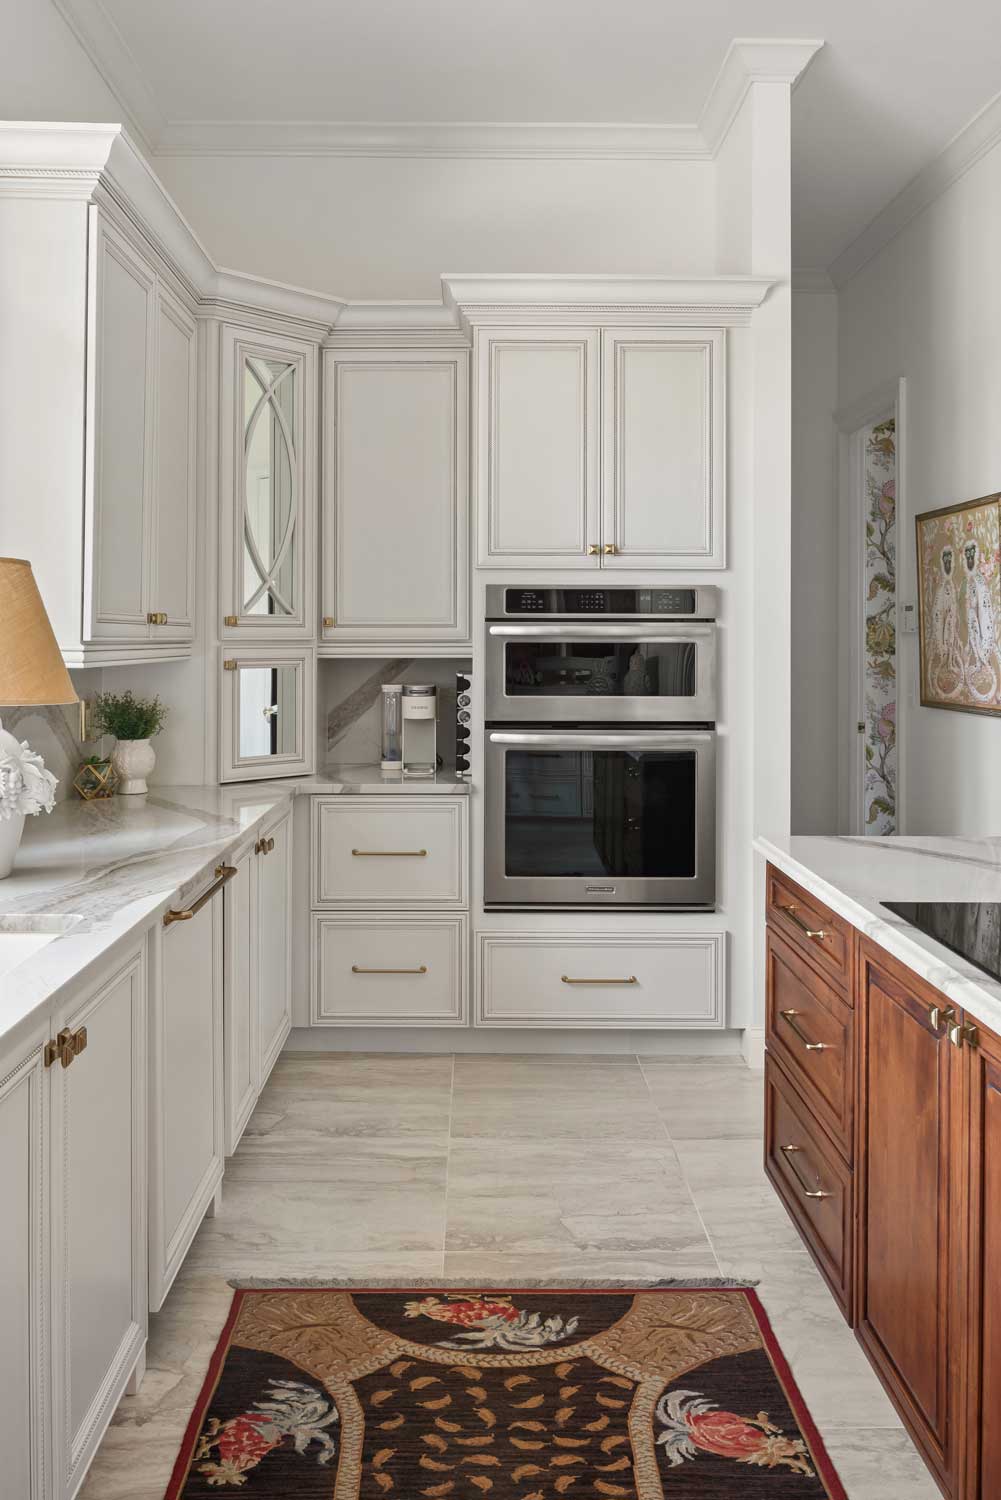 kitchen remodel in seminole county fl featuring white custom cabinets and hidden appliances